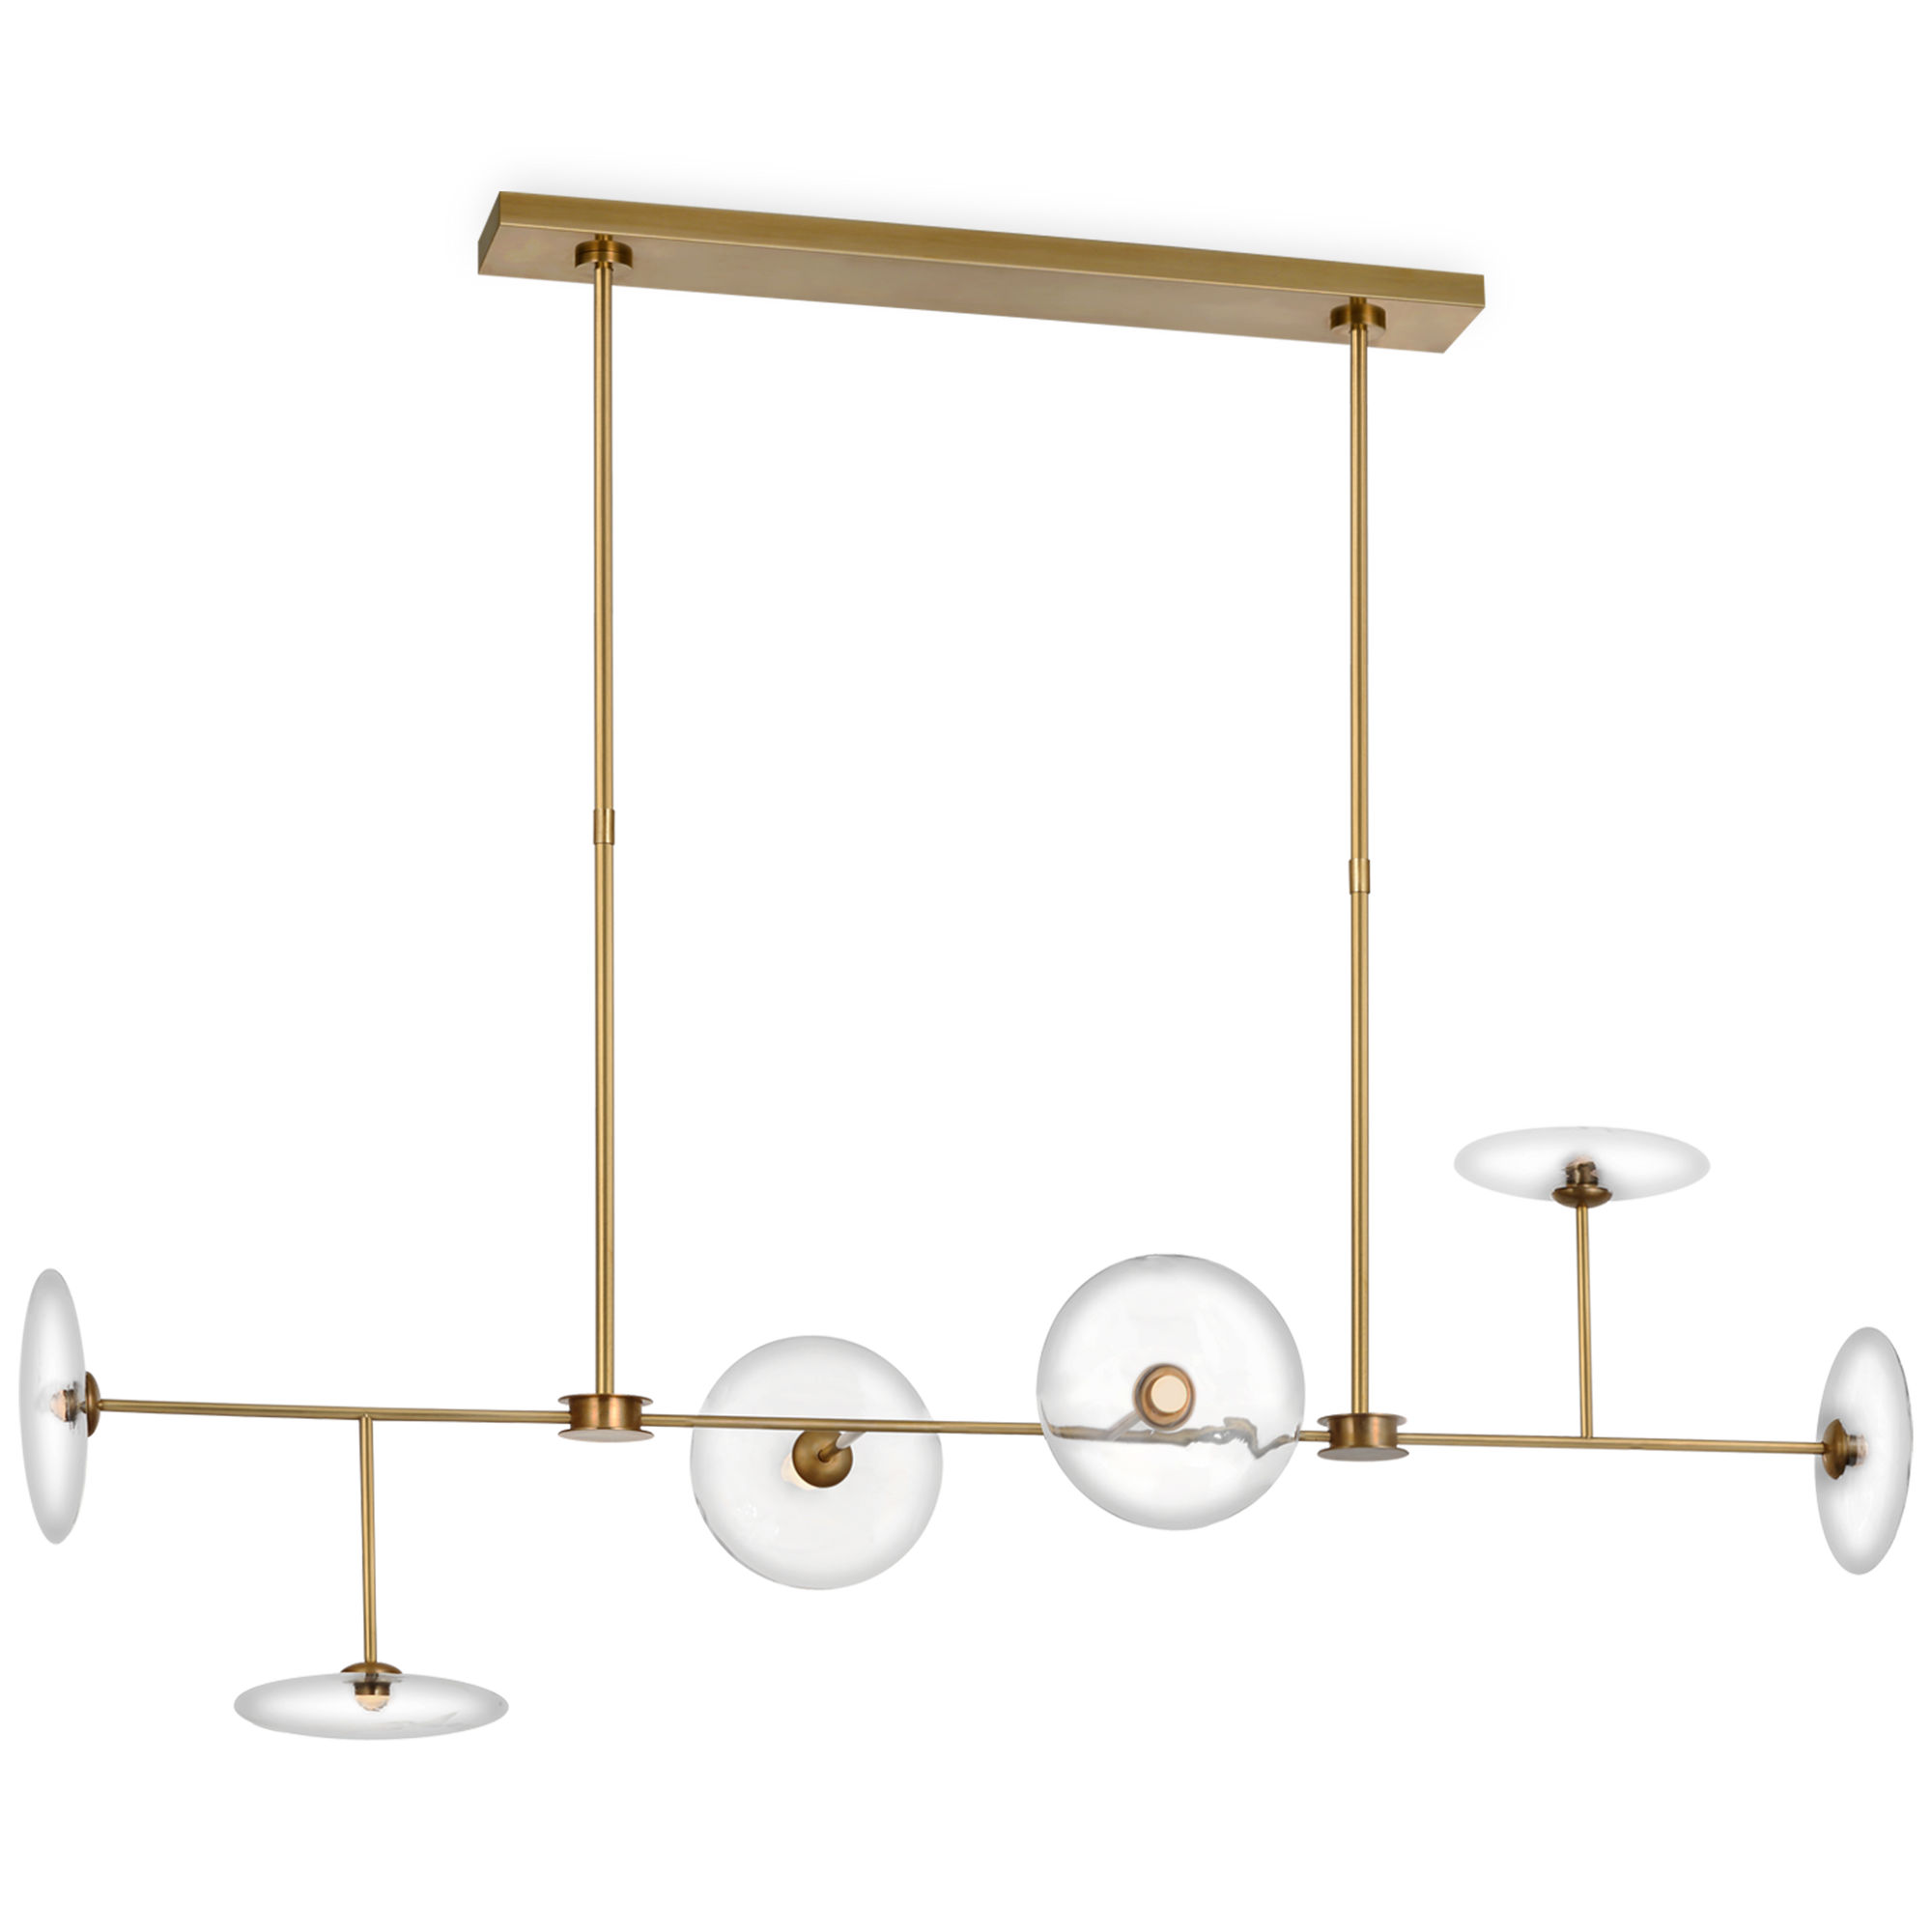 The Calvino Large Chandelier bridges elegance and function, with a modern edge.